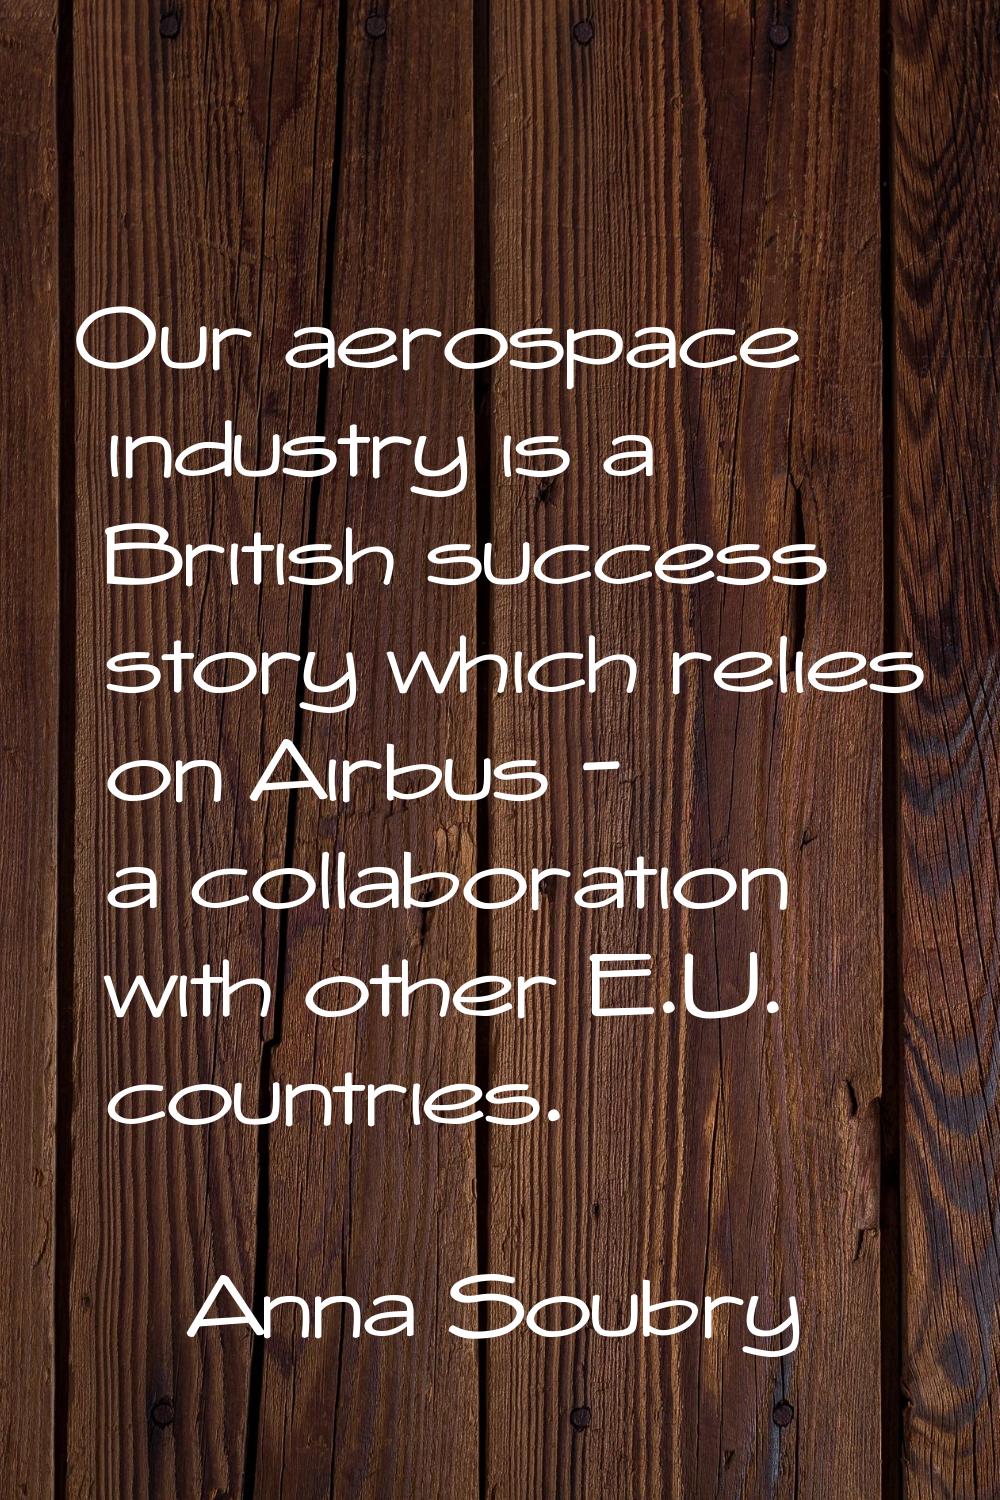 Our aerospace industry is a British success story which relies on Airbus - a collaboration with oth